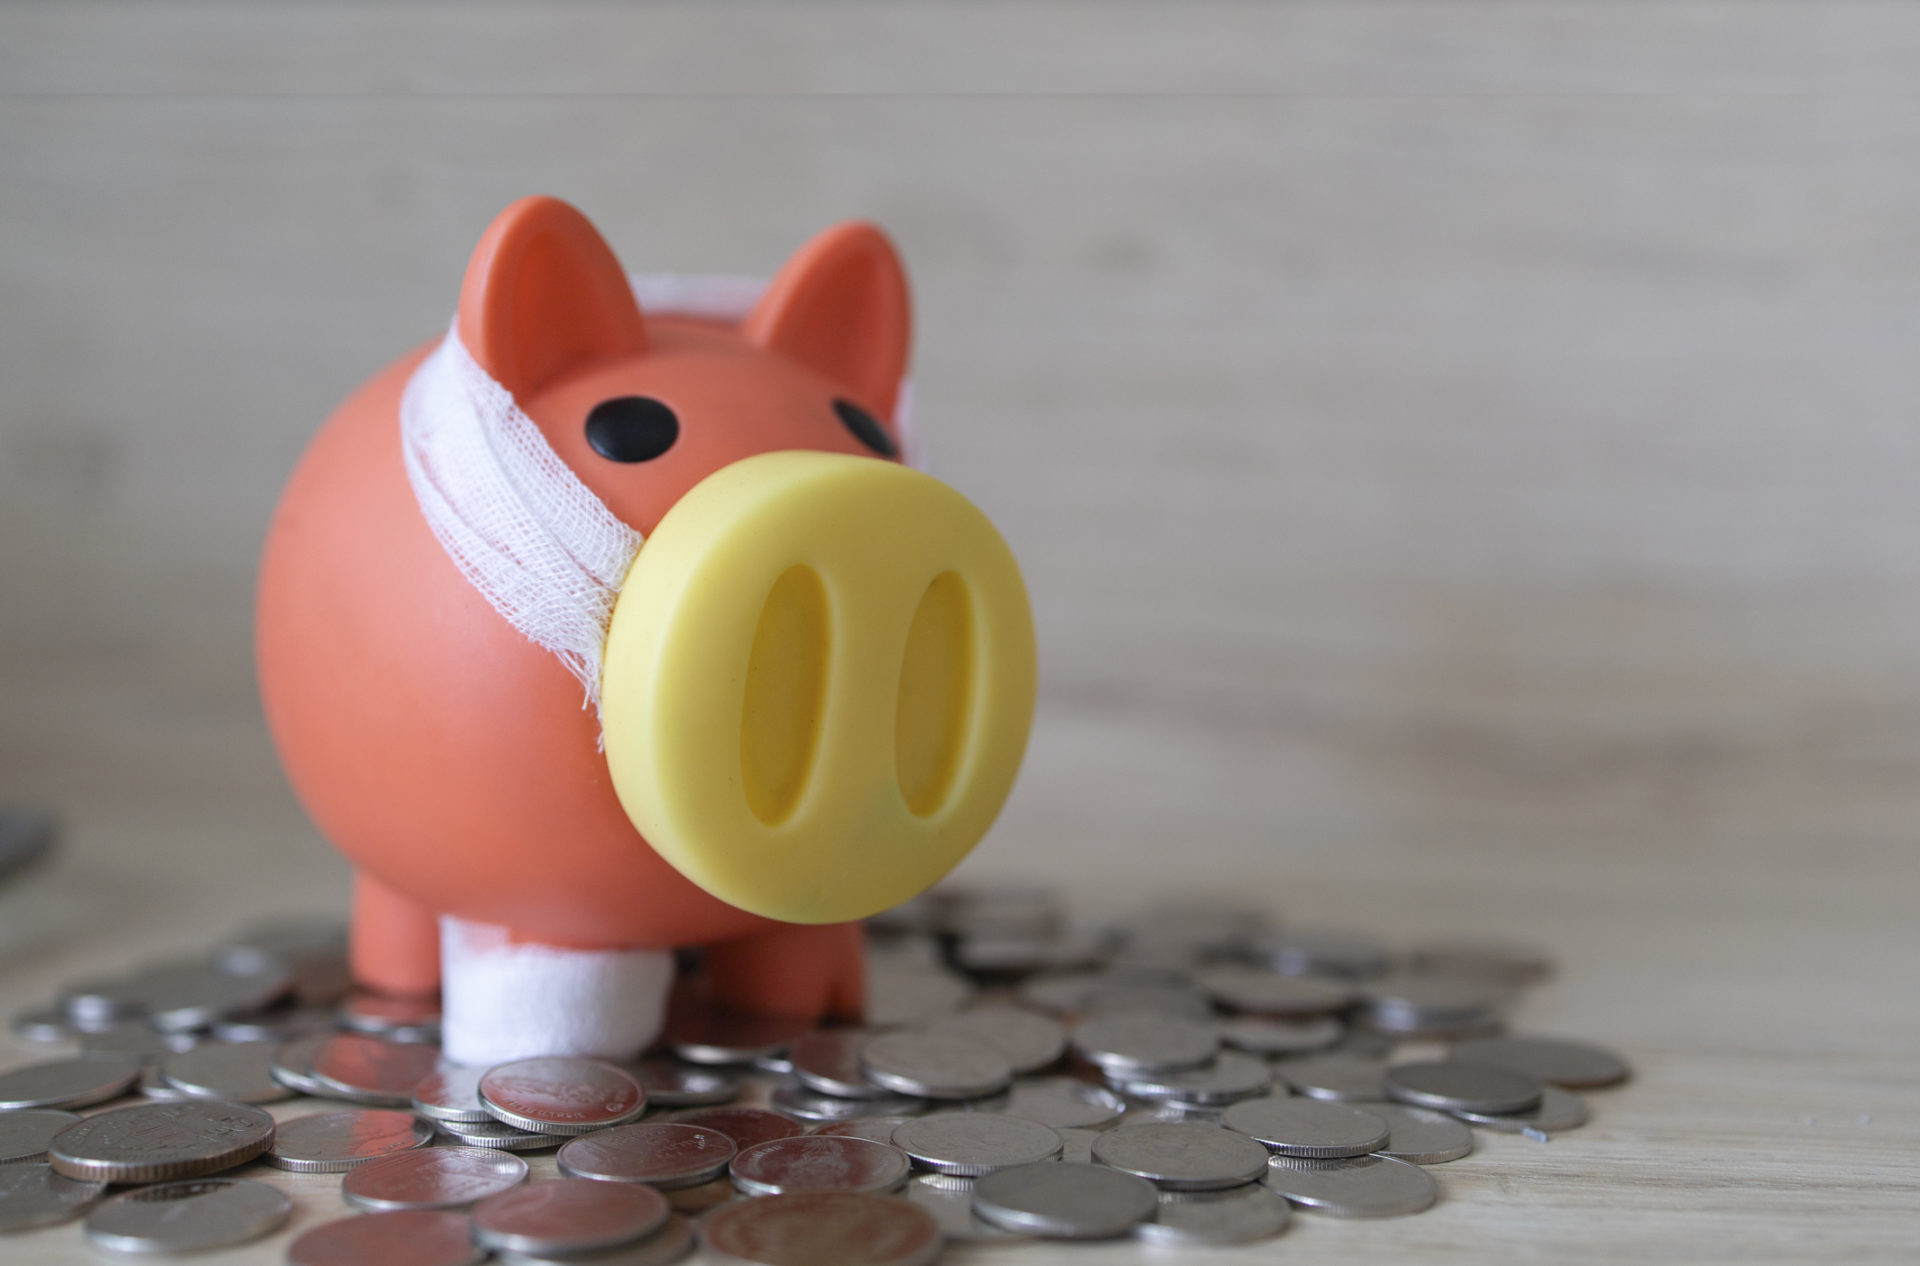 Red color piggy bank on top of coins showing the importance of saving money and financial planning